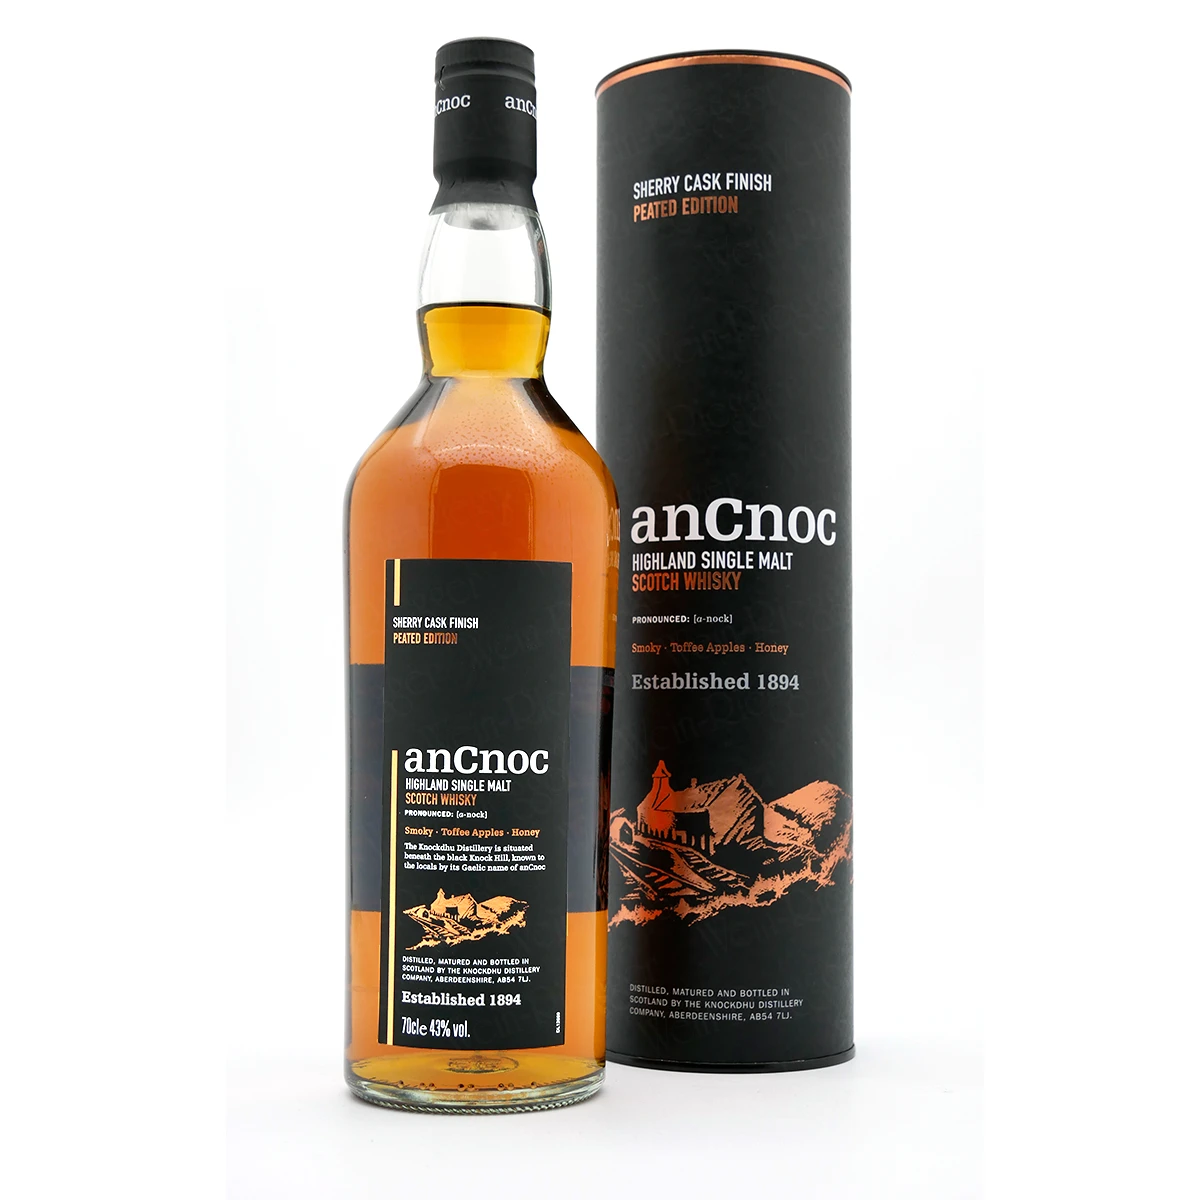 anCnoc | PEATED Sherry Cask Finish